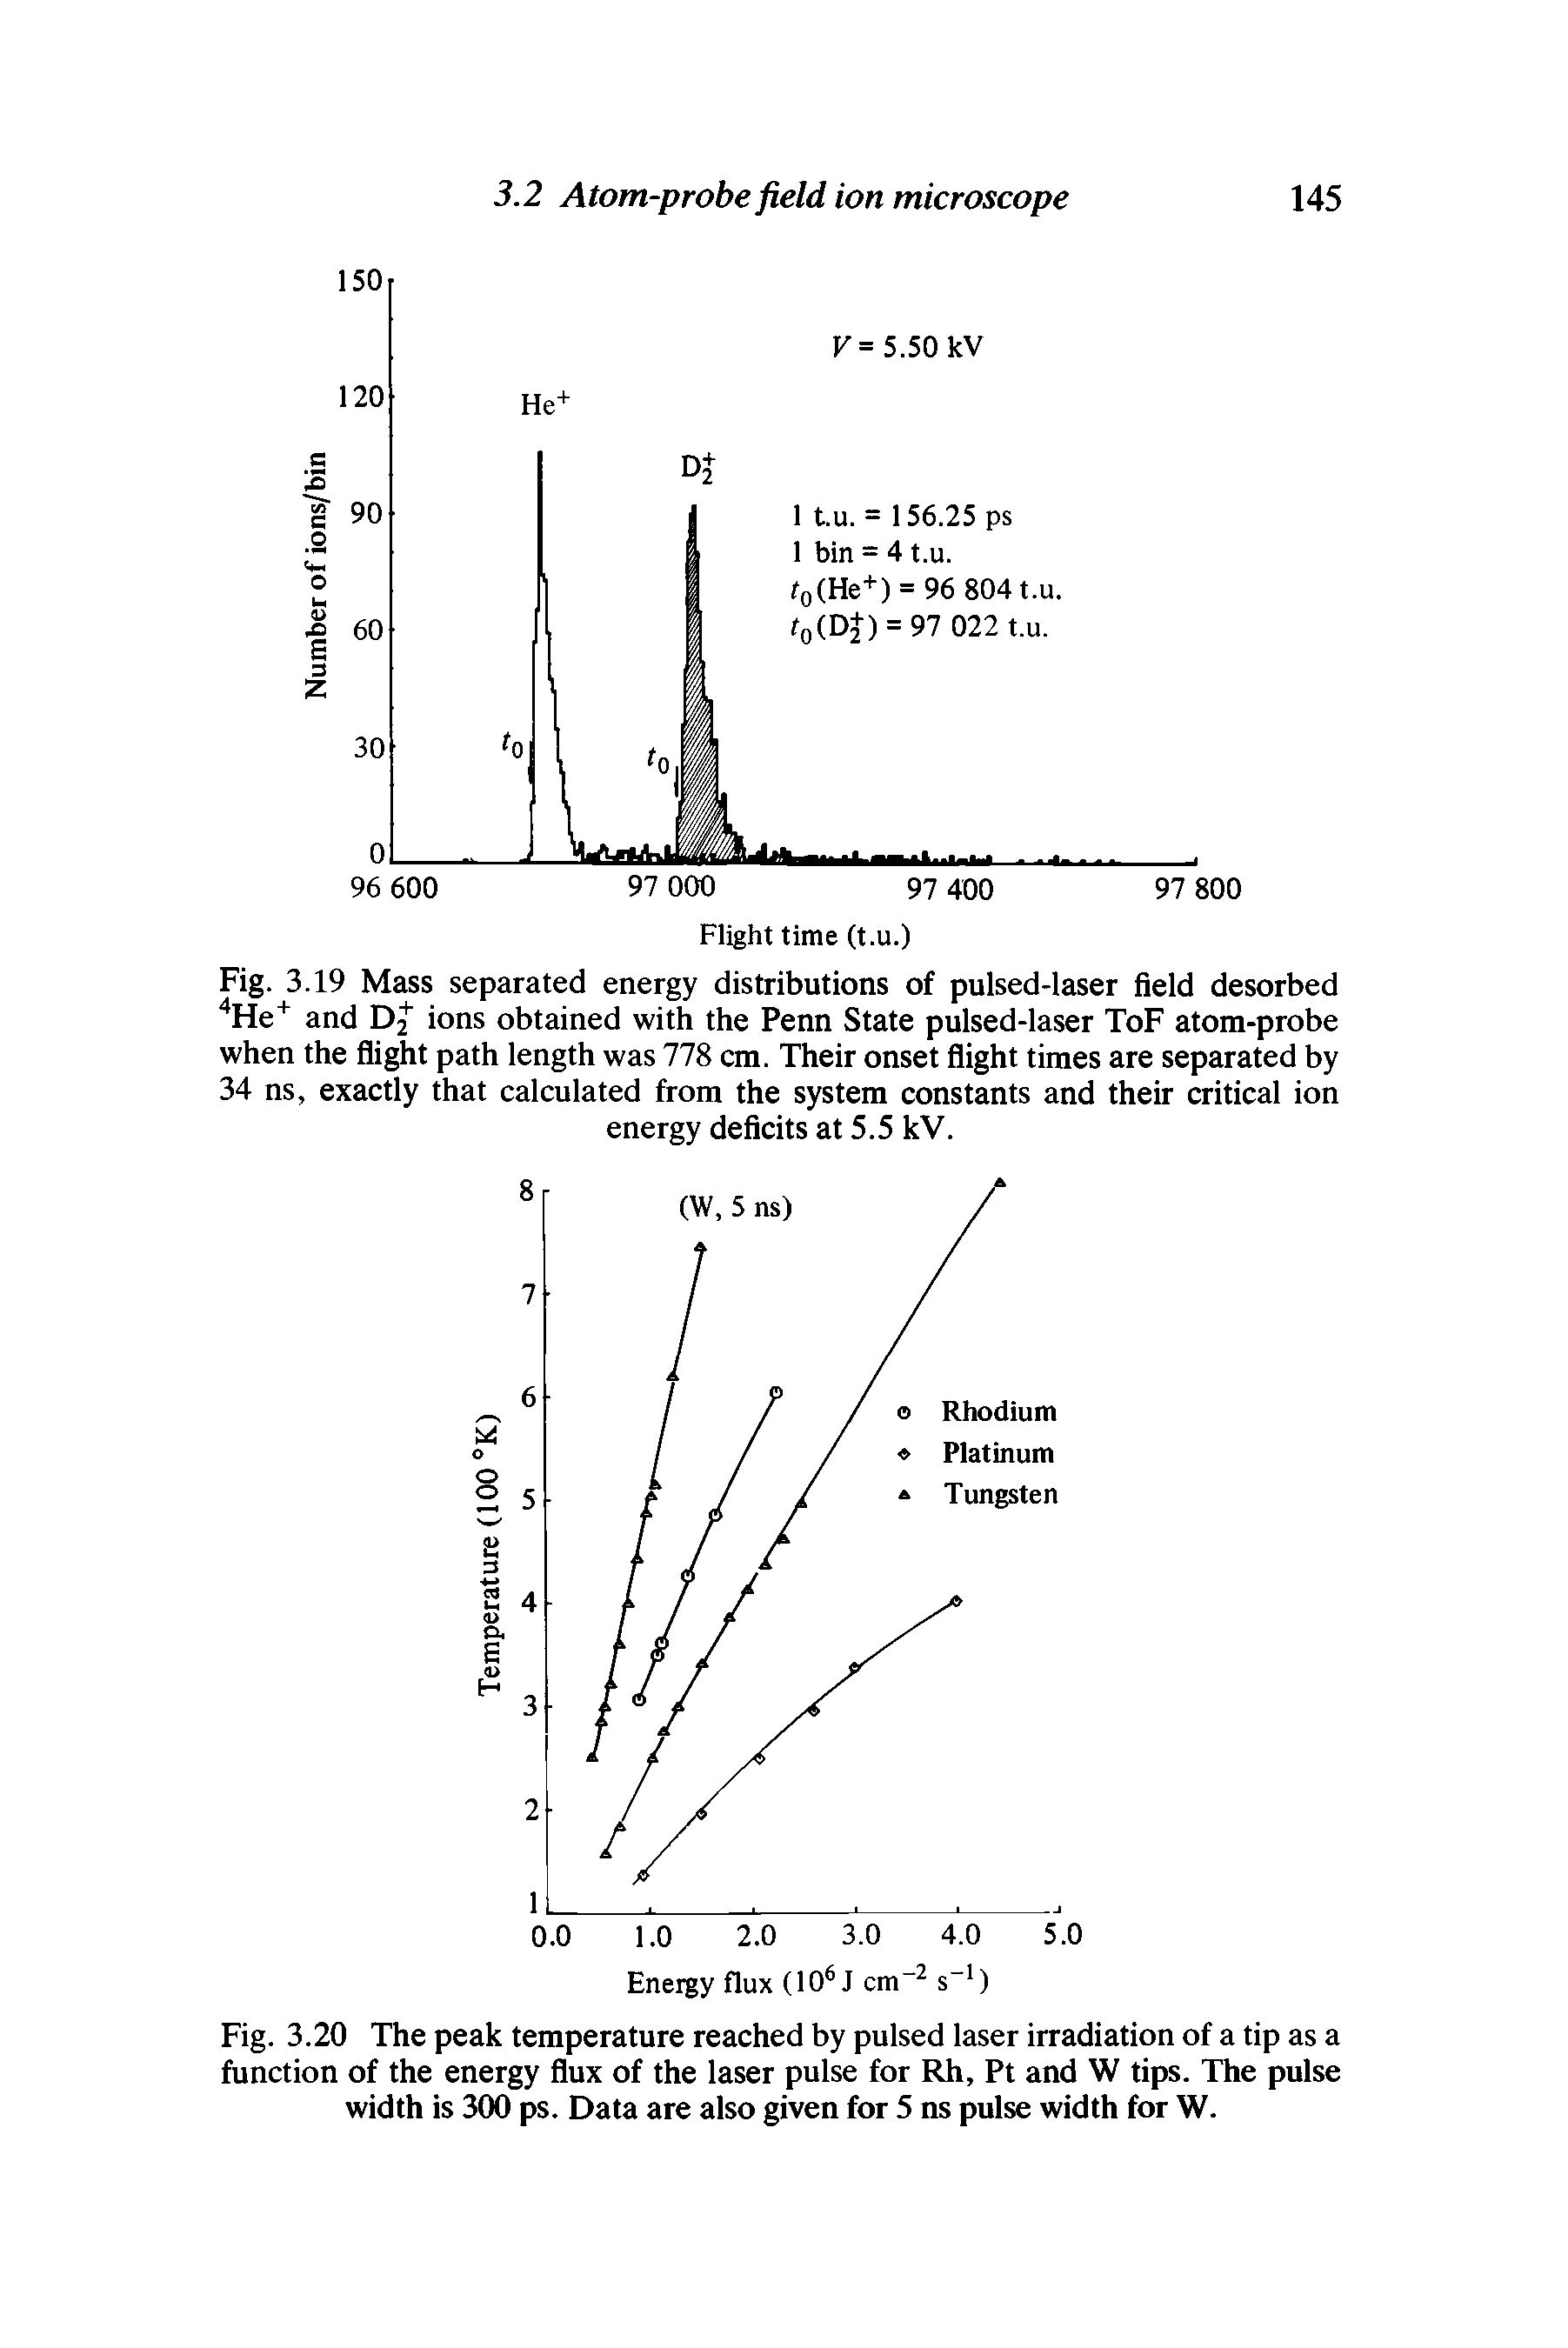 Fig. 3.19 Mass separated energy distributions of pulsed-laser field desorbed 4He+ and ions obtained with the Penn State pulsed-laser ToF atom-probe when the flight path length was 778 cm. Their onset flight times are separated by 34 ns, exactly that calculated from the system constants and their critical ion energy deficits at 5.5 kV.